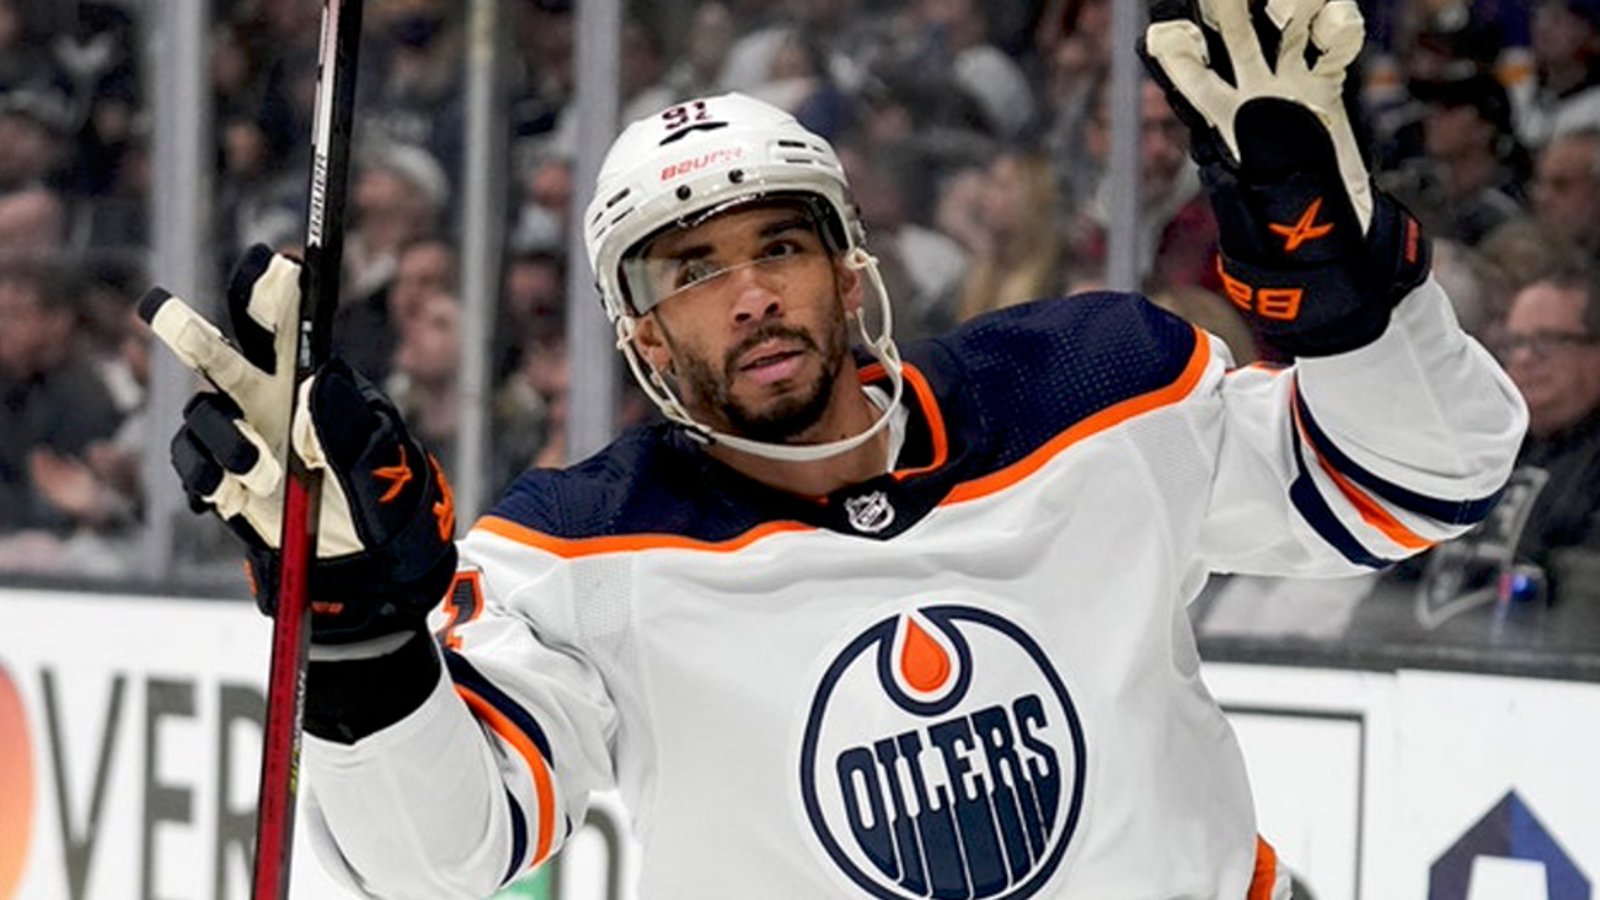 Oilers' Whitney out indefinitely after surgery